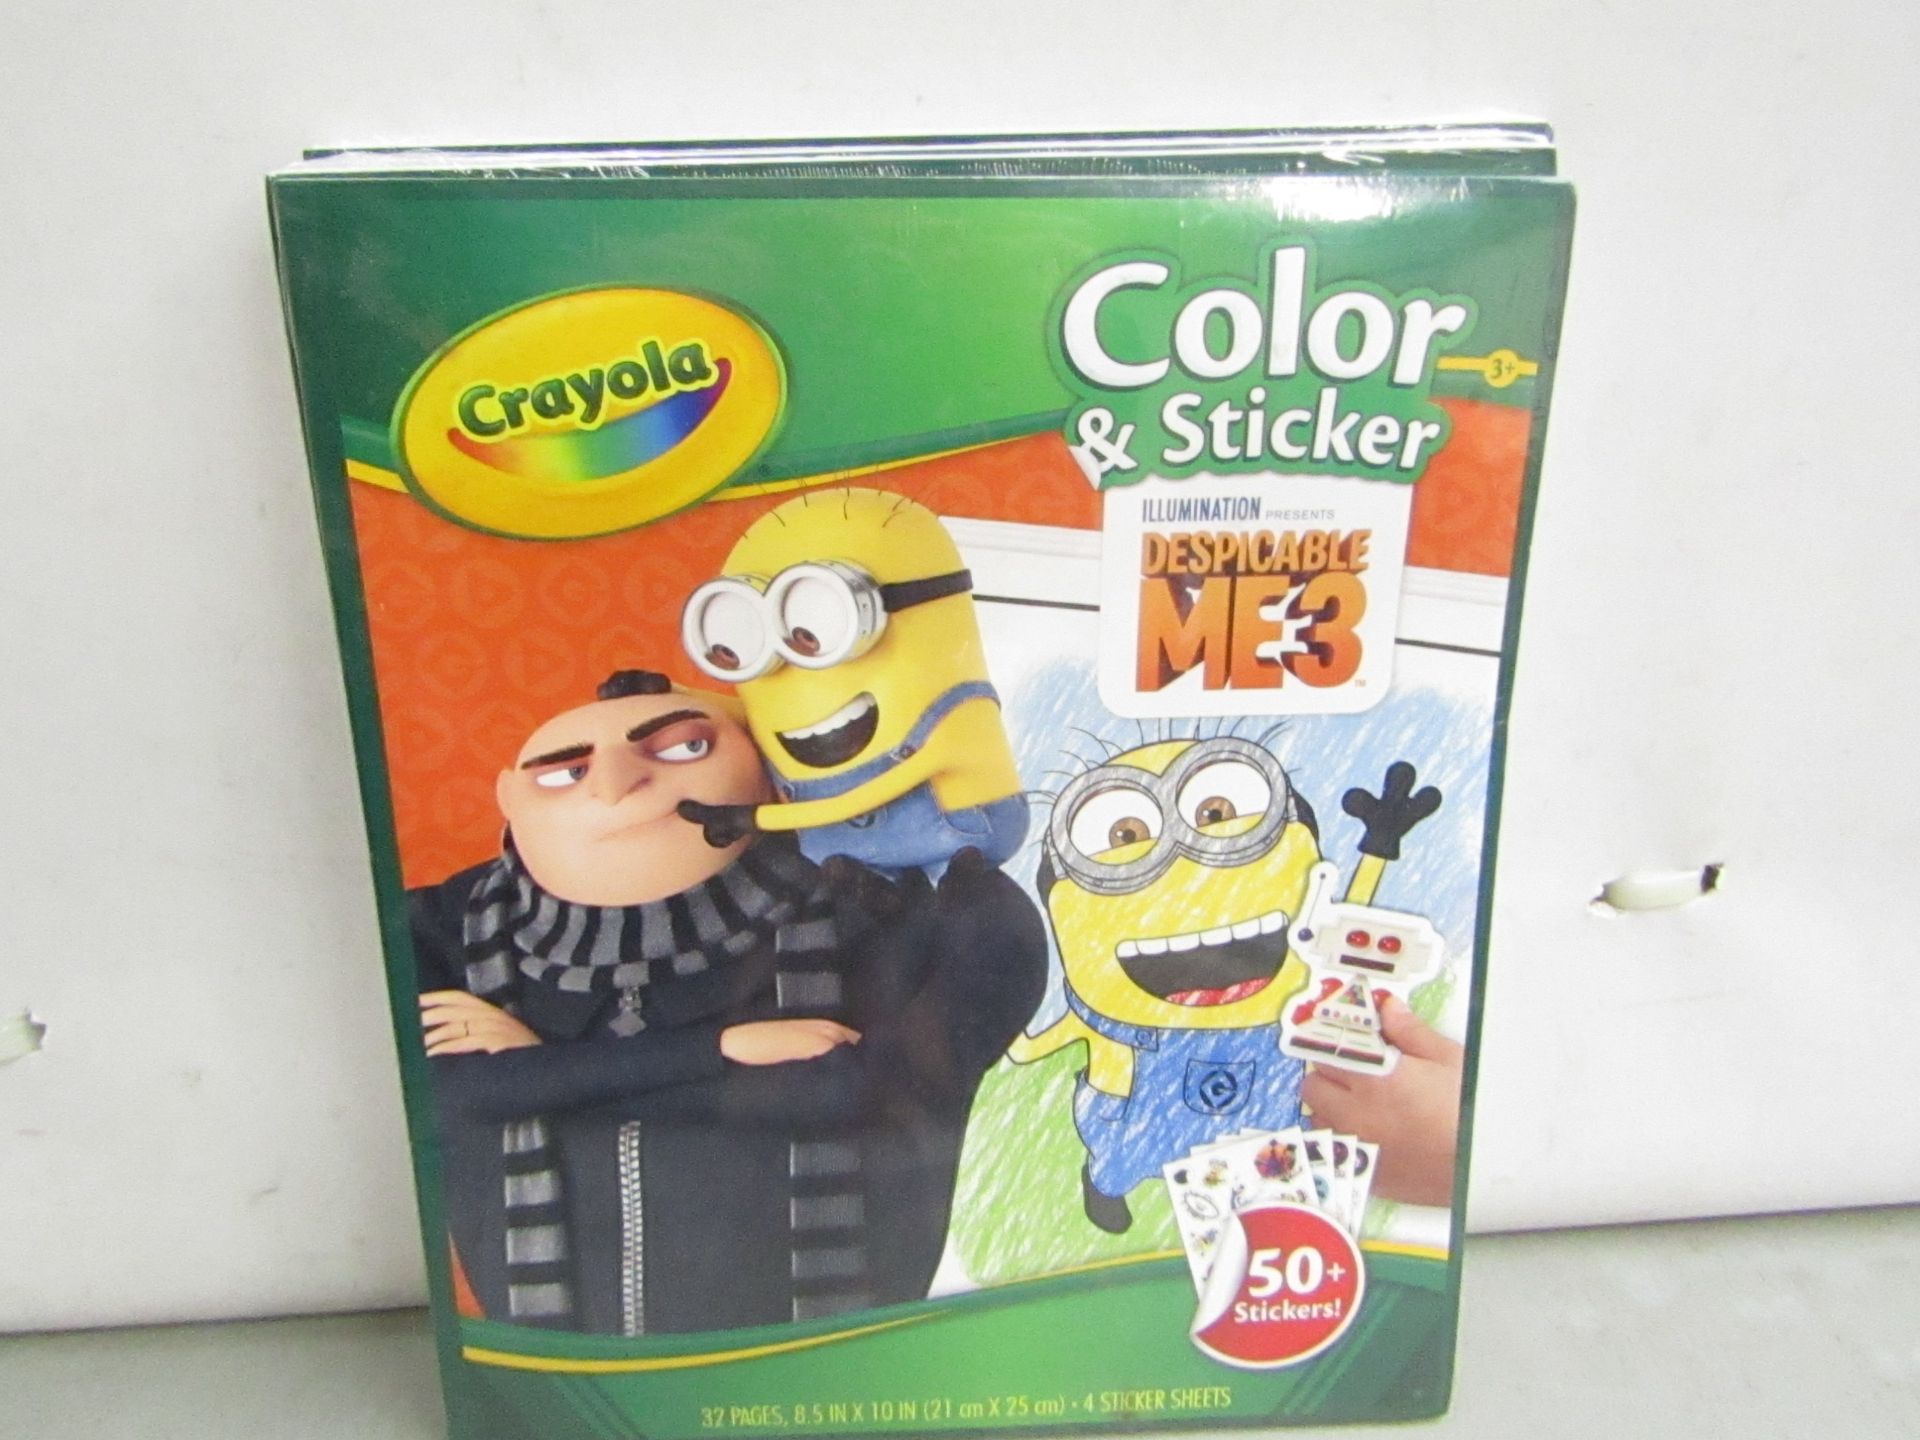 1 x pack of 6 Crayola color and sticker Despicable Me, packaged.